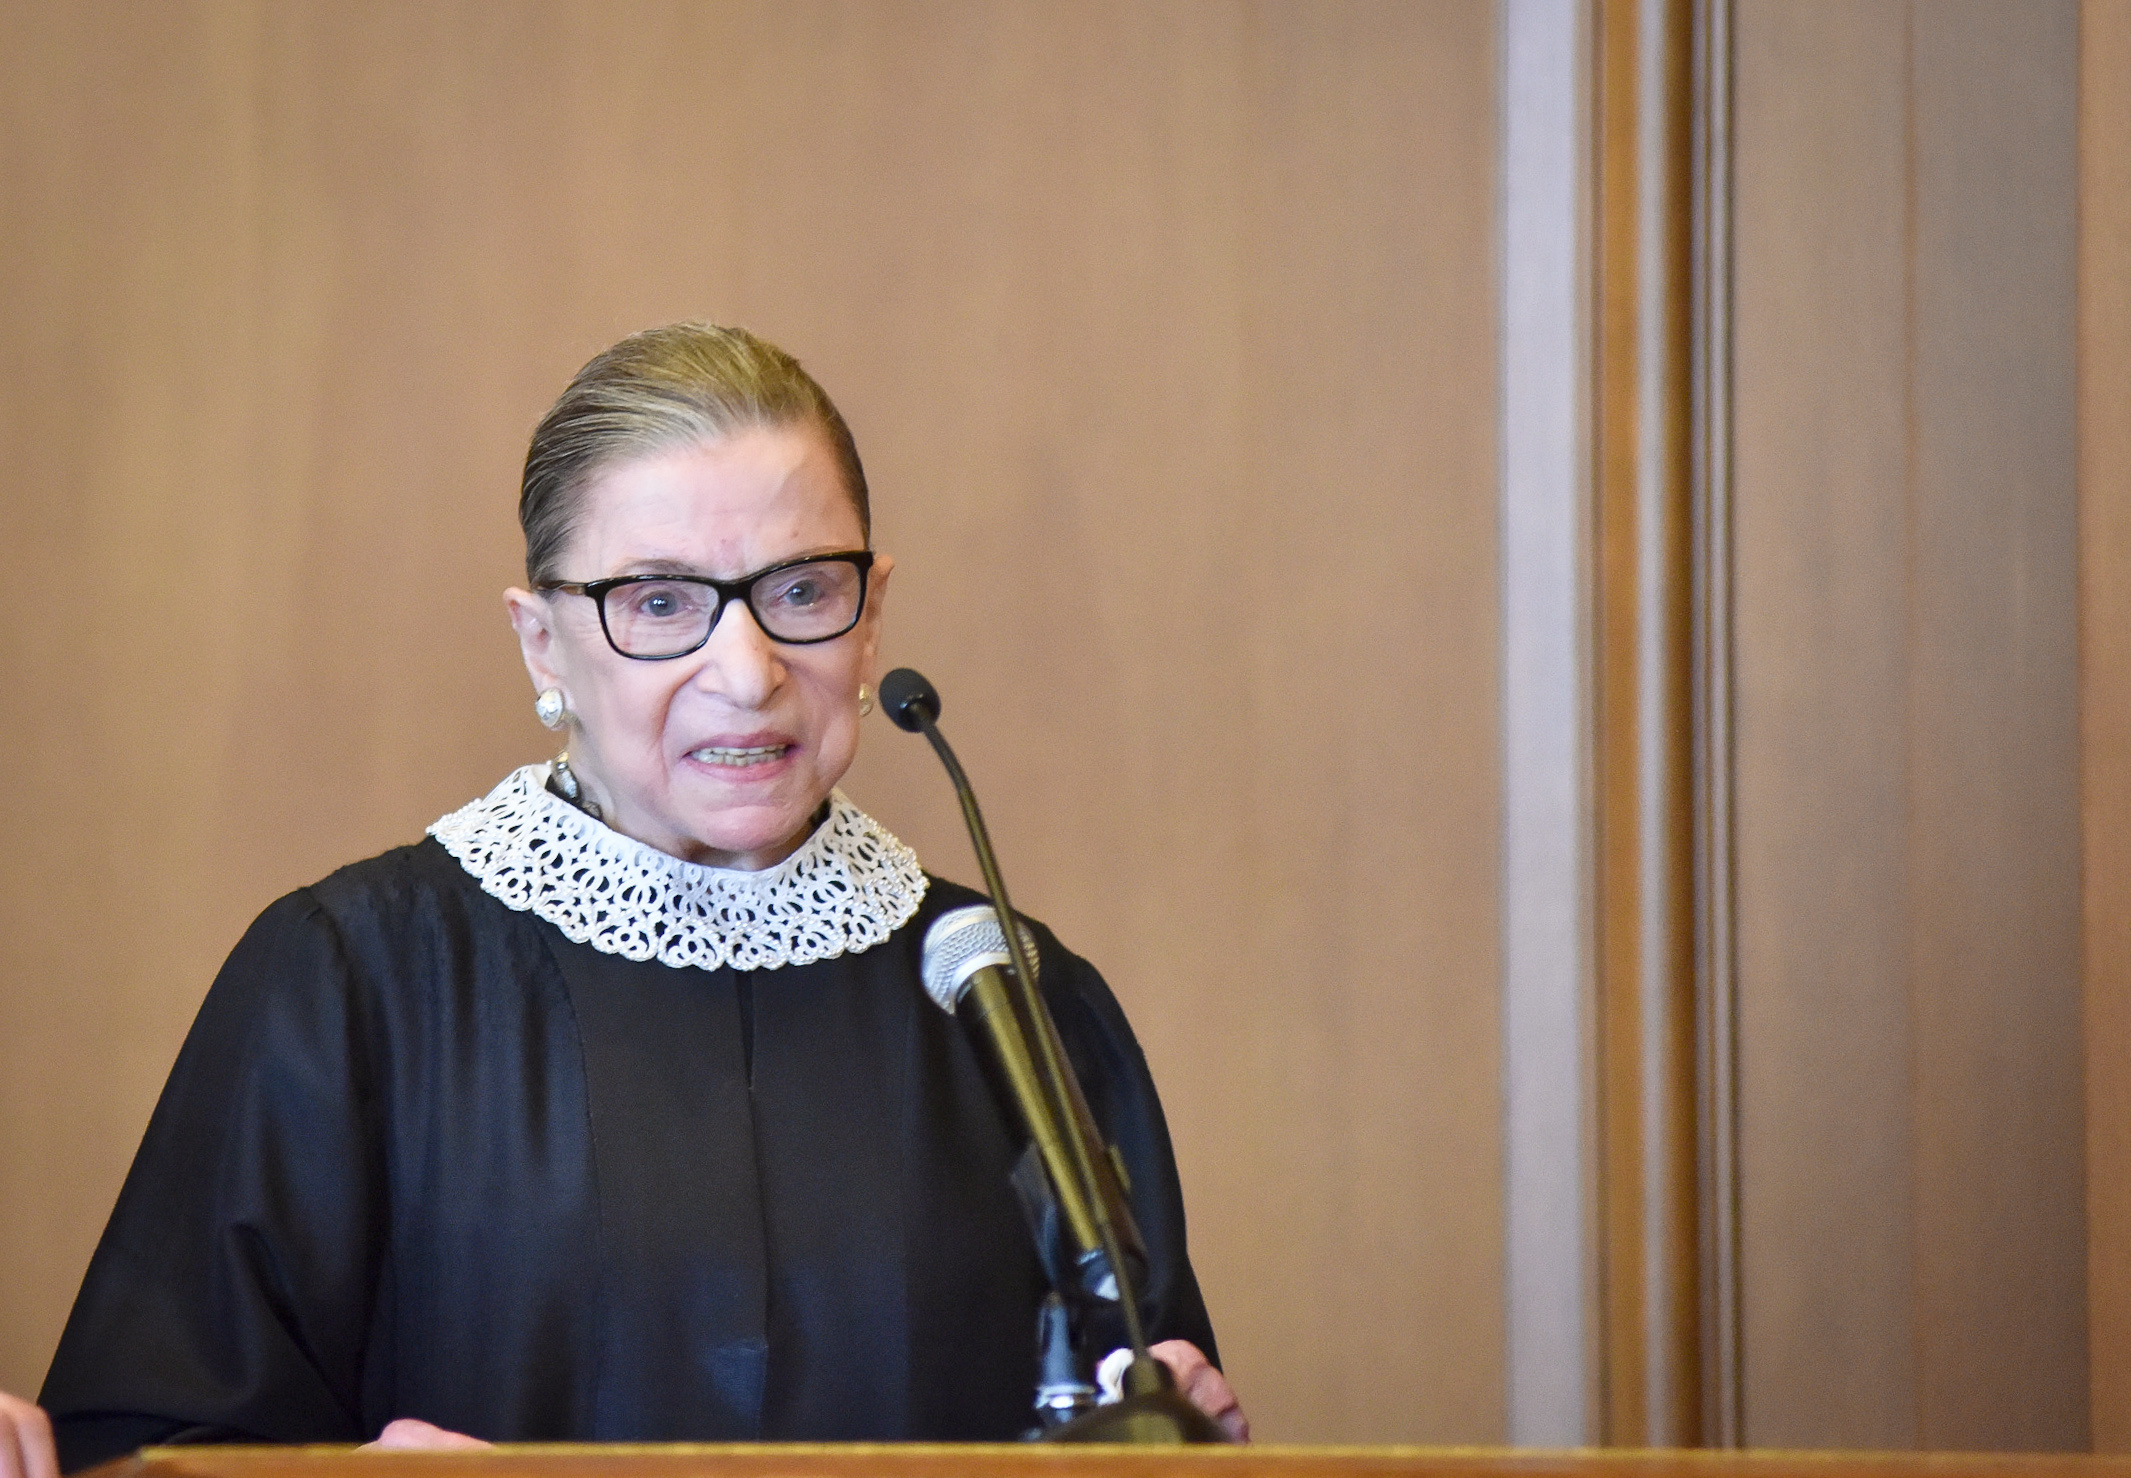 Image: Ruth Bader Ginsburg “will retire from the U.S. Supreme Court in January, 2019” says same news source that accurately reported her cancer